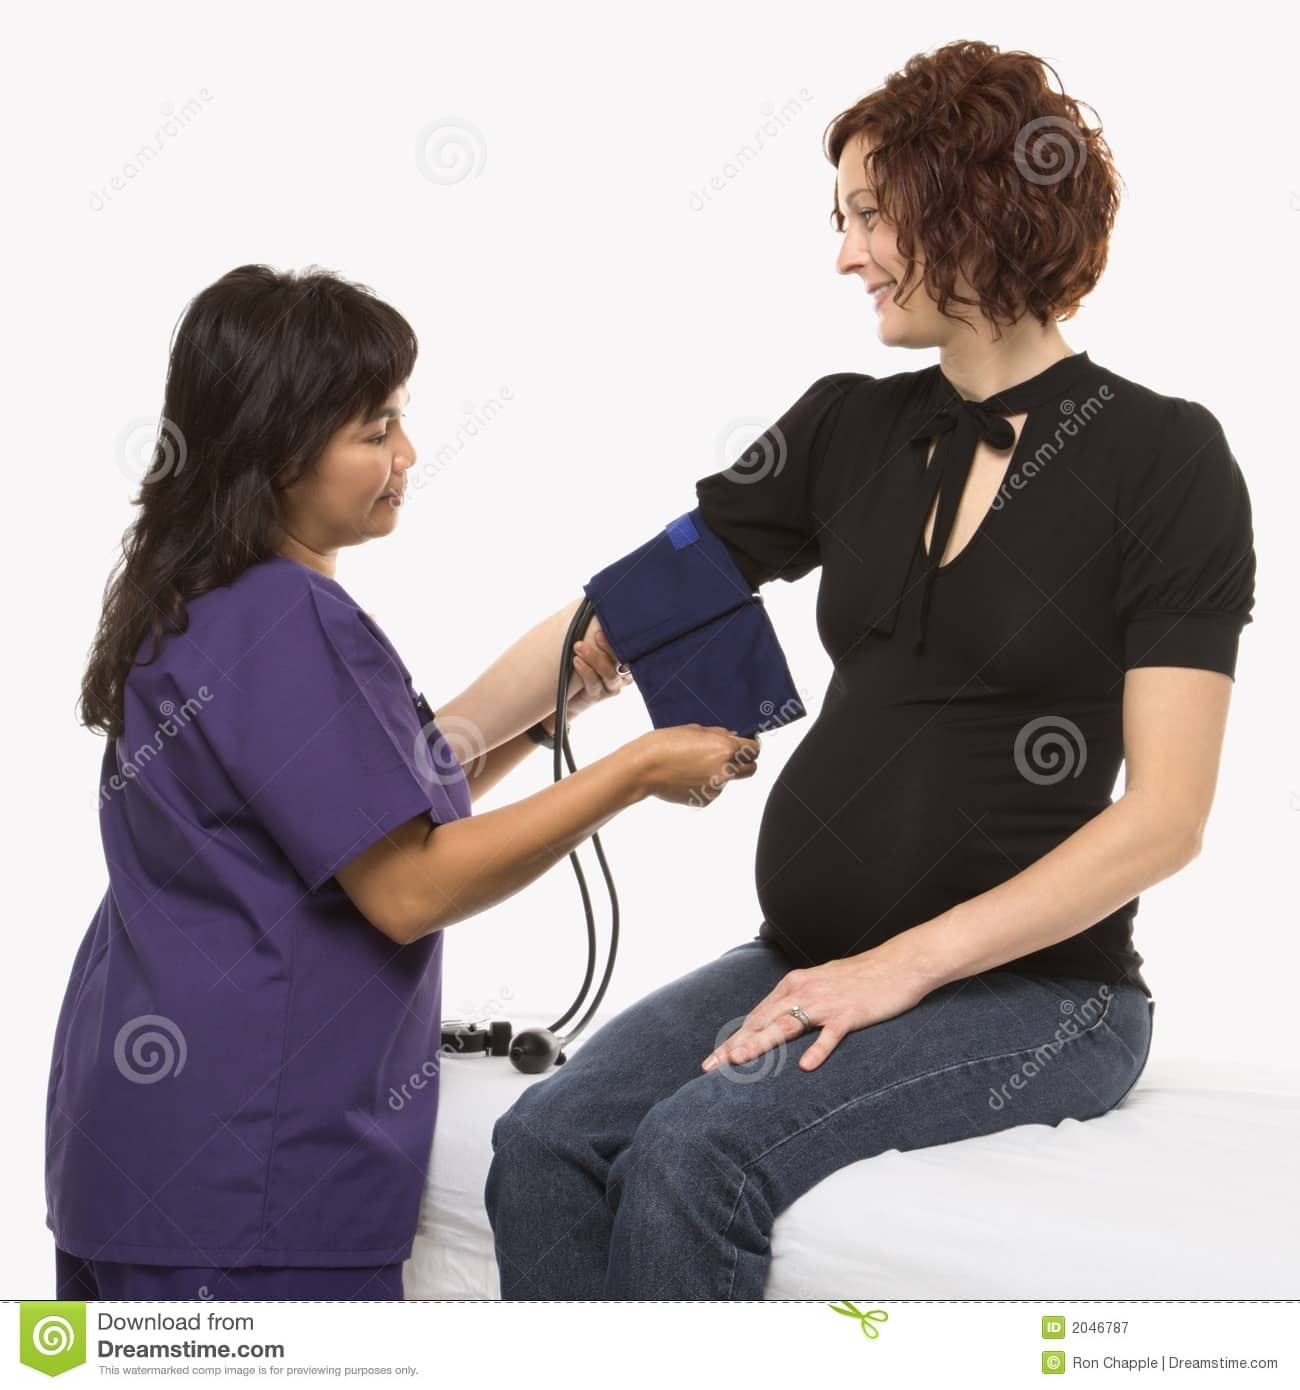 Pregnant Woman Having Blood Pressure Checked. Stock Image